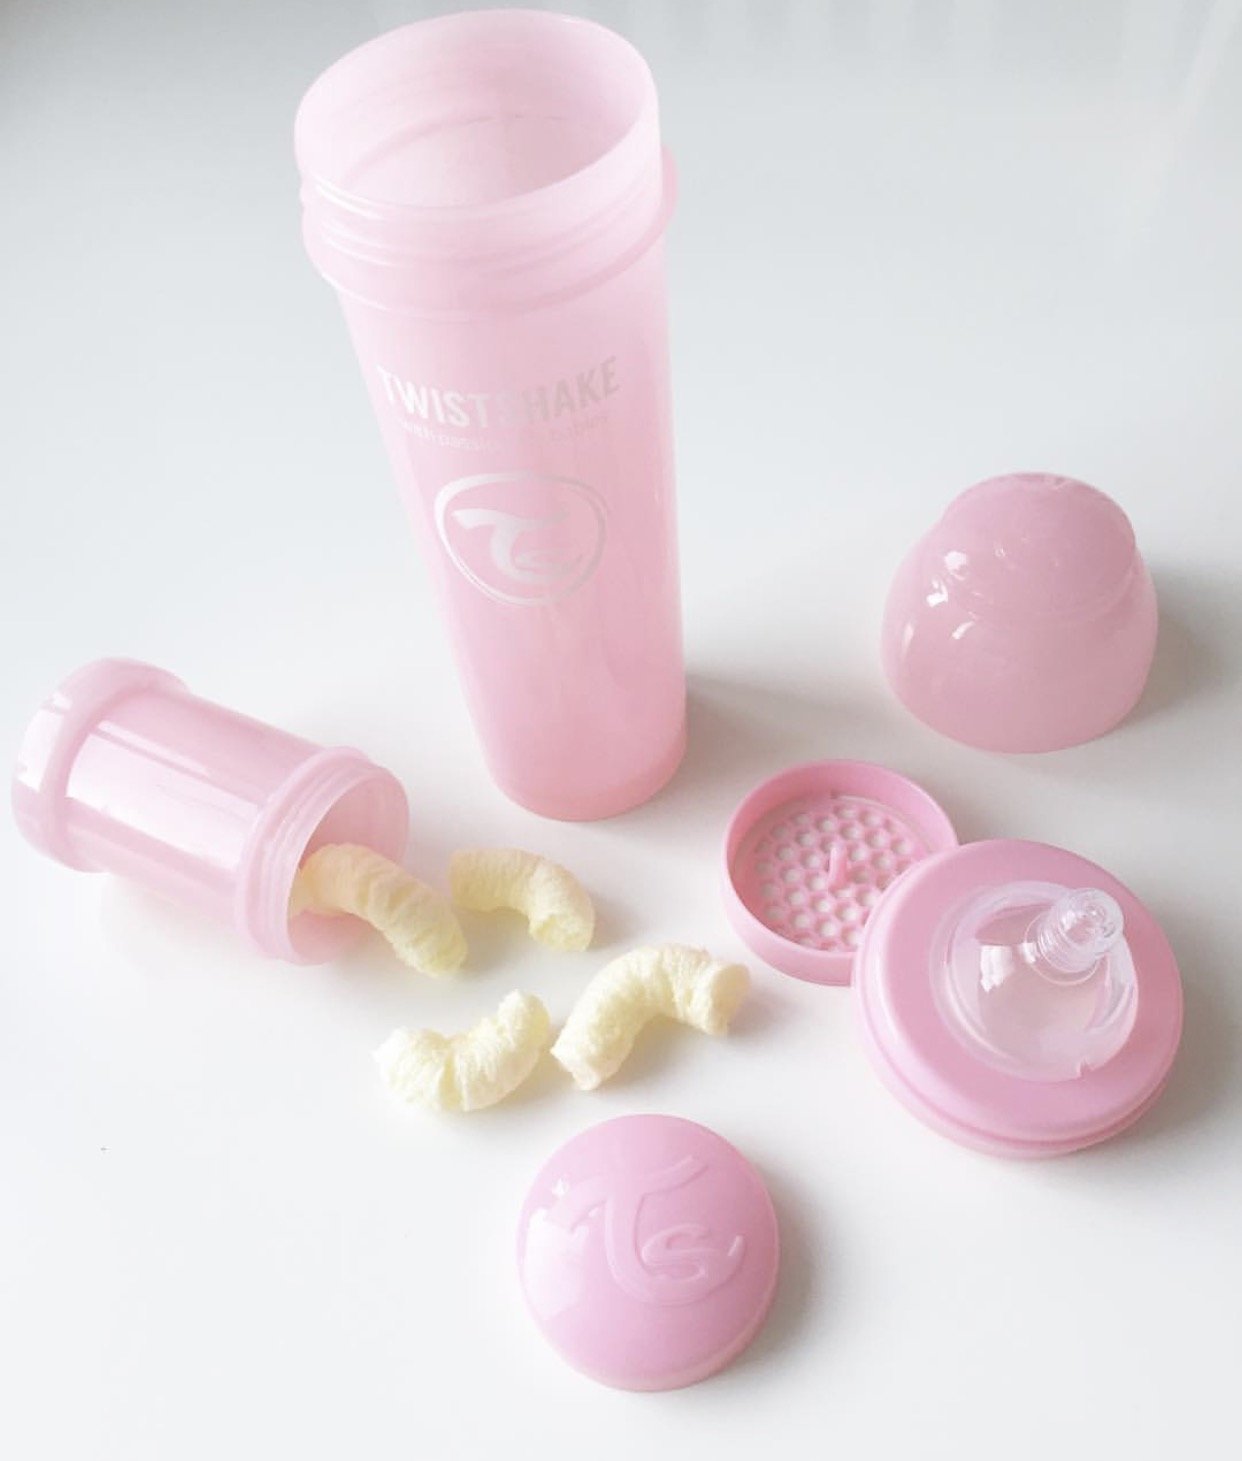 Twistshake Anti Colic Baby Bottles - Premium 330ml/11oz Bottles with 100ml Milk Storage Container for a Comfortable Feeding Experience for Baby Care - Pastel Pink